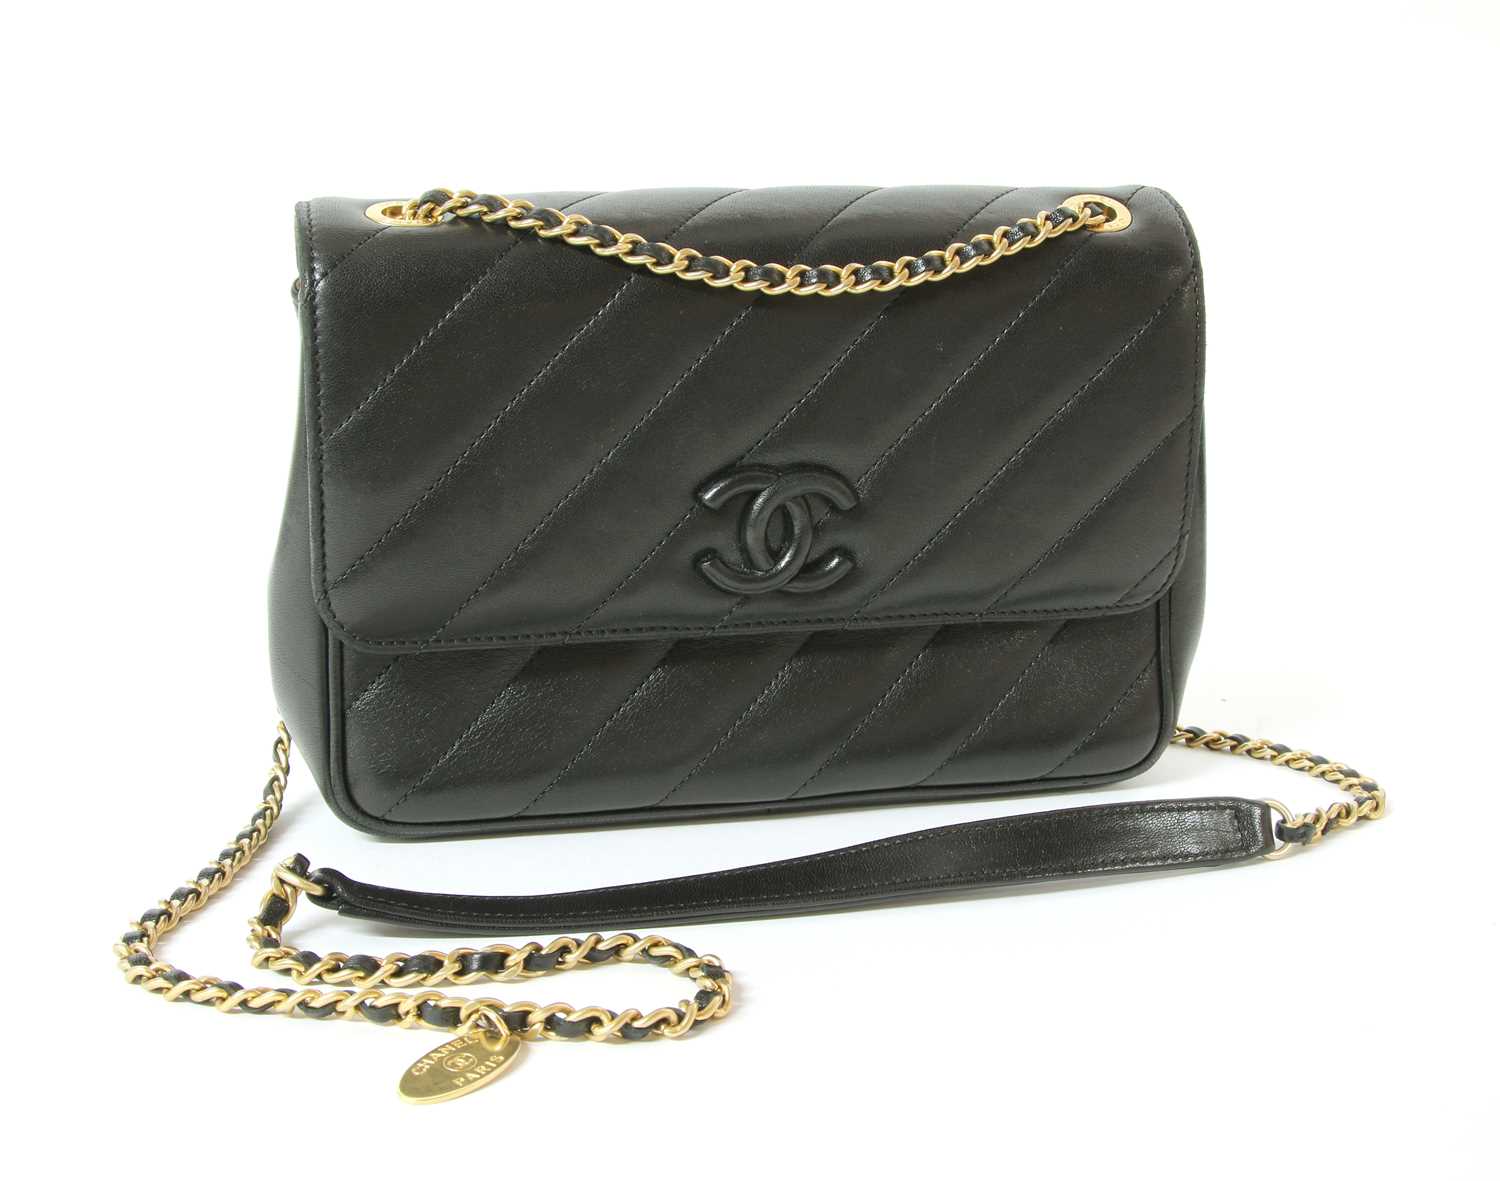 Chanel Metallic Gold Quilted Lambskin Classic Flap Bag